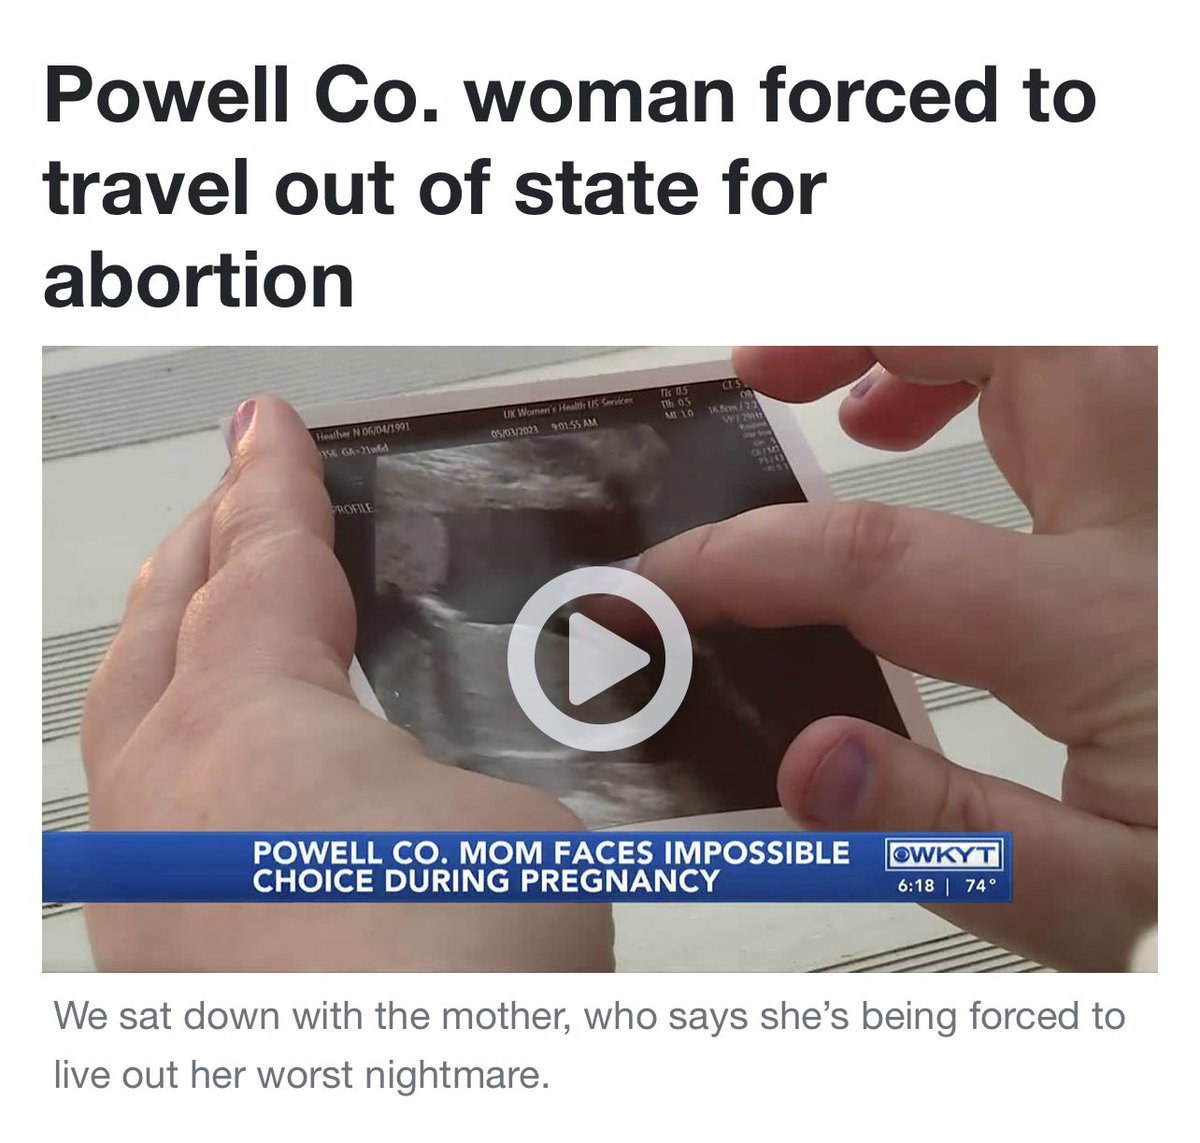 A woman in Kentucky was told her fetus had a fatal abnormality known as anencephaly. Doctors in Kentucky were unable to terminate her pregnancy due to the state’s abortio ban.

Her options? Travel out of state or continue the doomed pregnancy for months. The cruelty is the point.